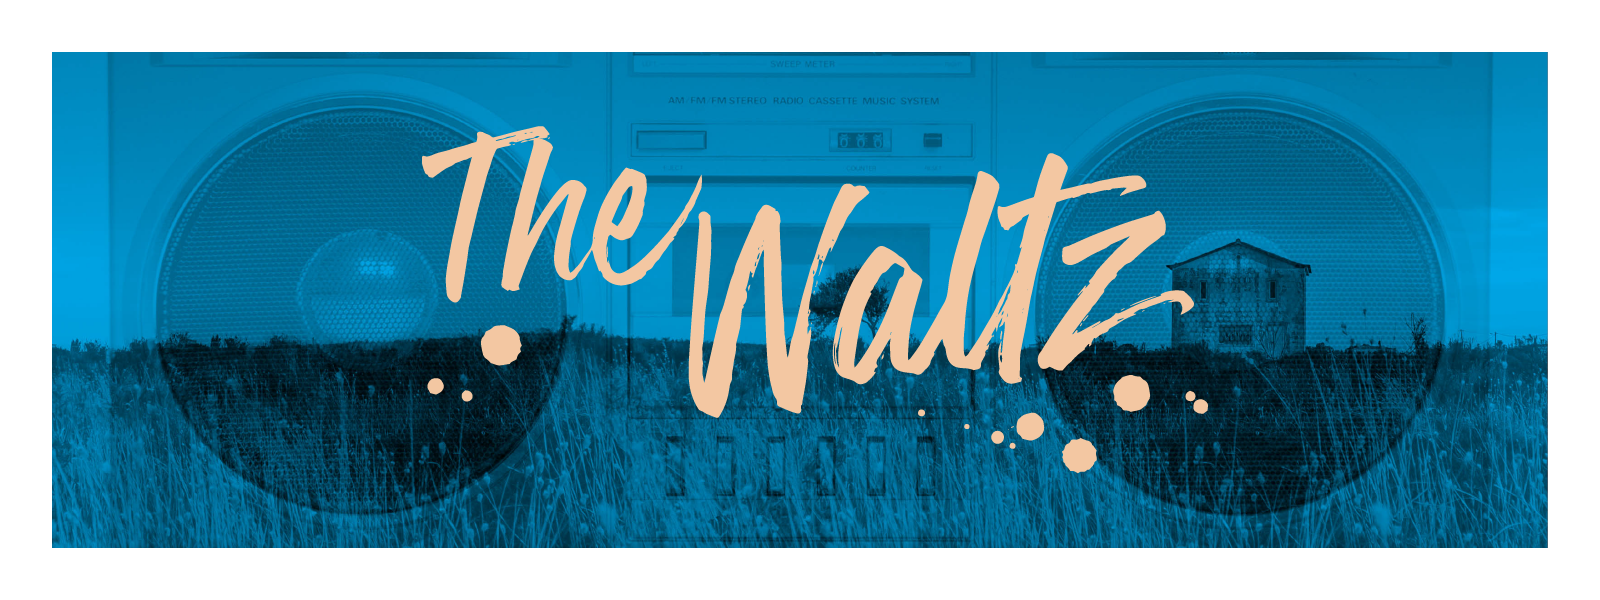 The Waltz show poster